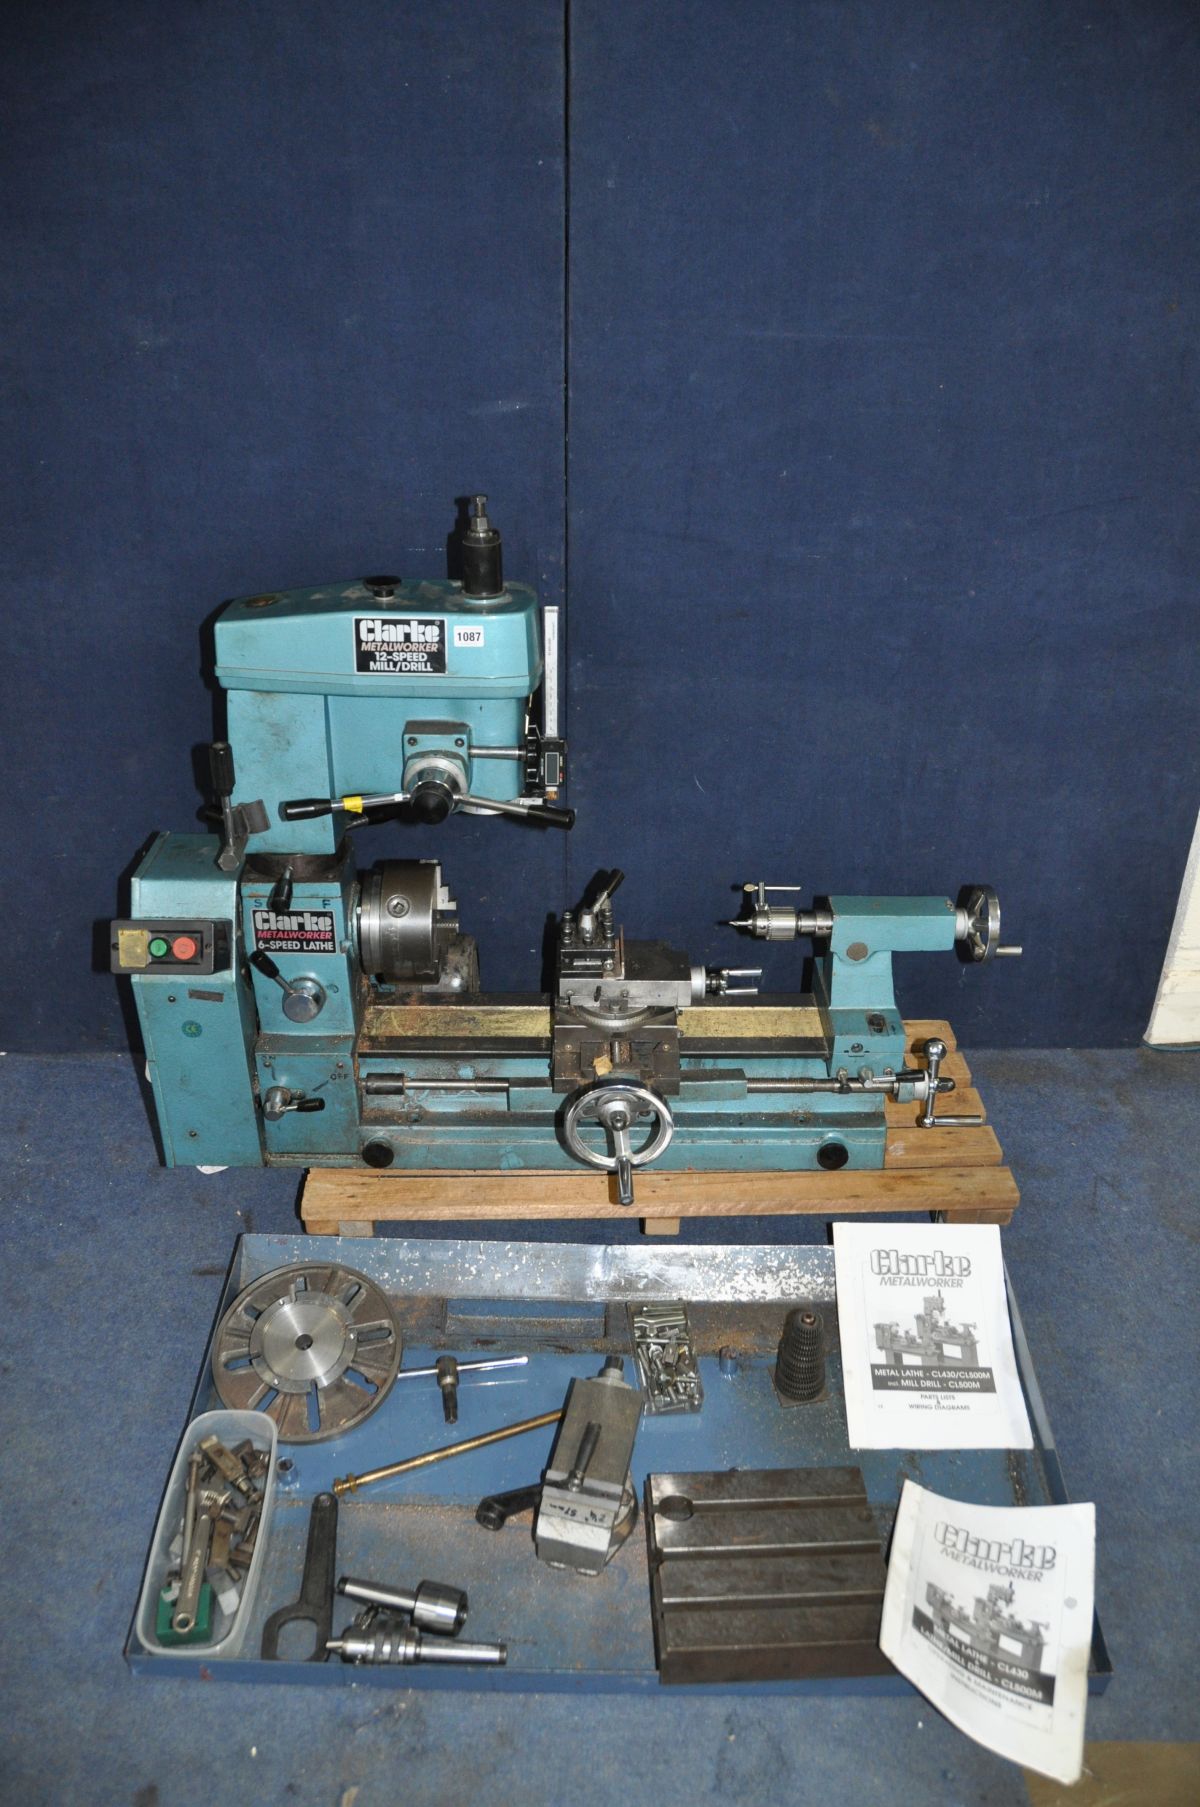 A CLARKE CL500M METALWORKER LATHE/MILL/DRILL, including three jaw chuck, feed gears, face plate,